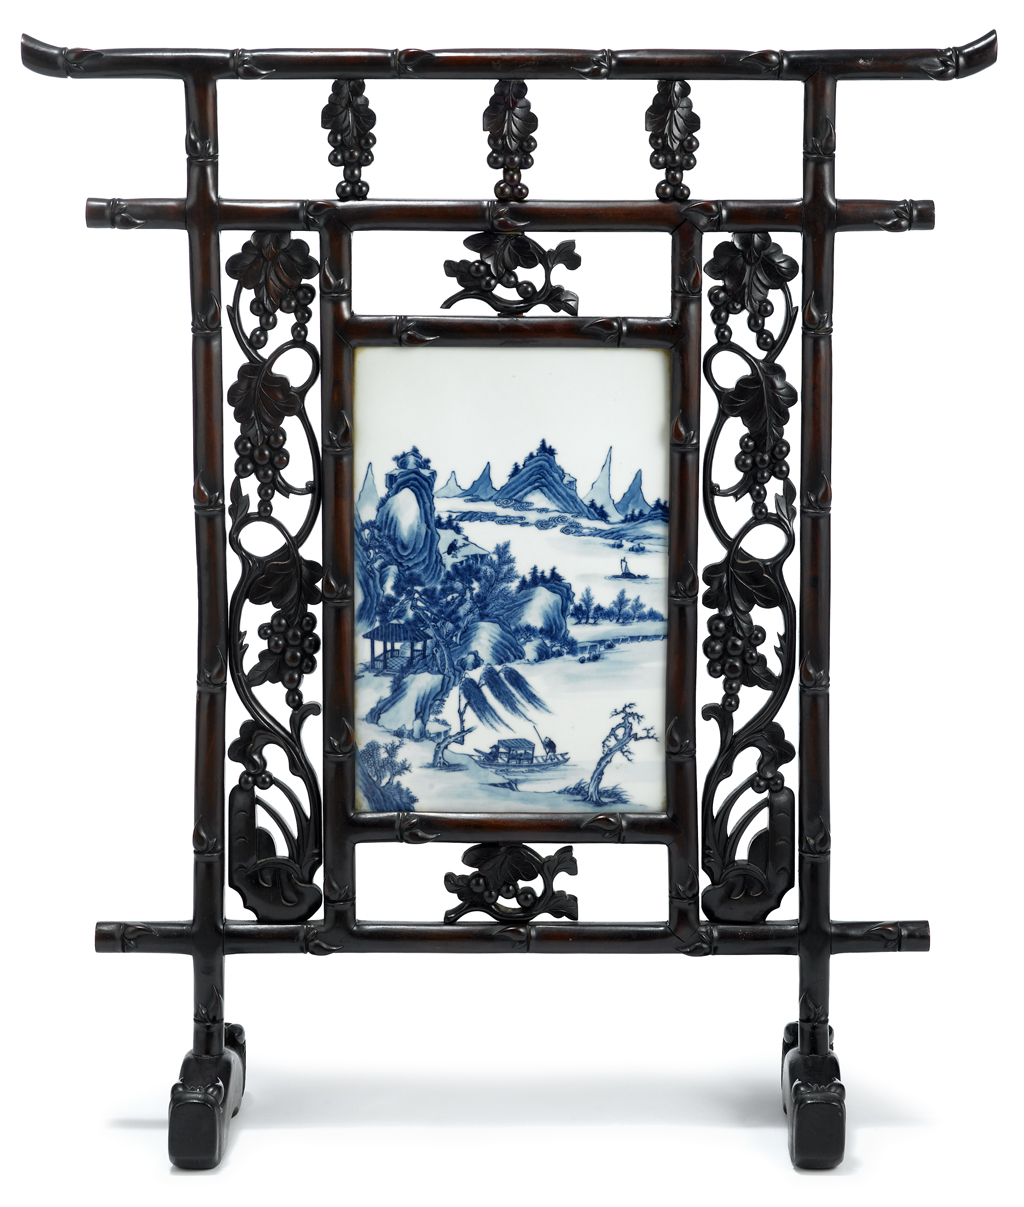 Lot 161 - Chinese blue and white porcelain and hardwood framed floor screen